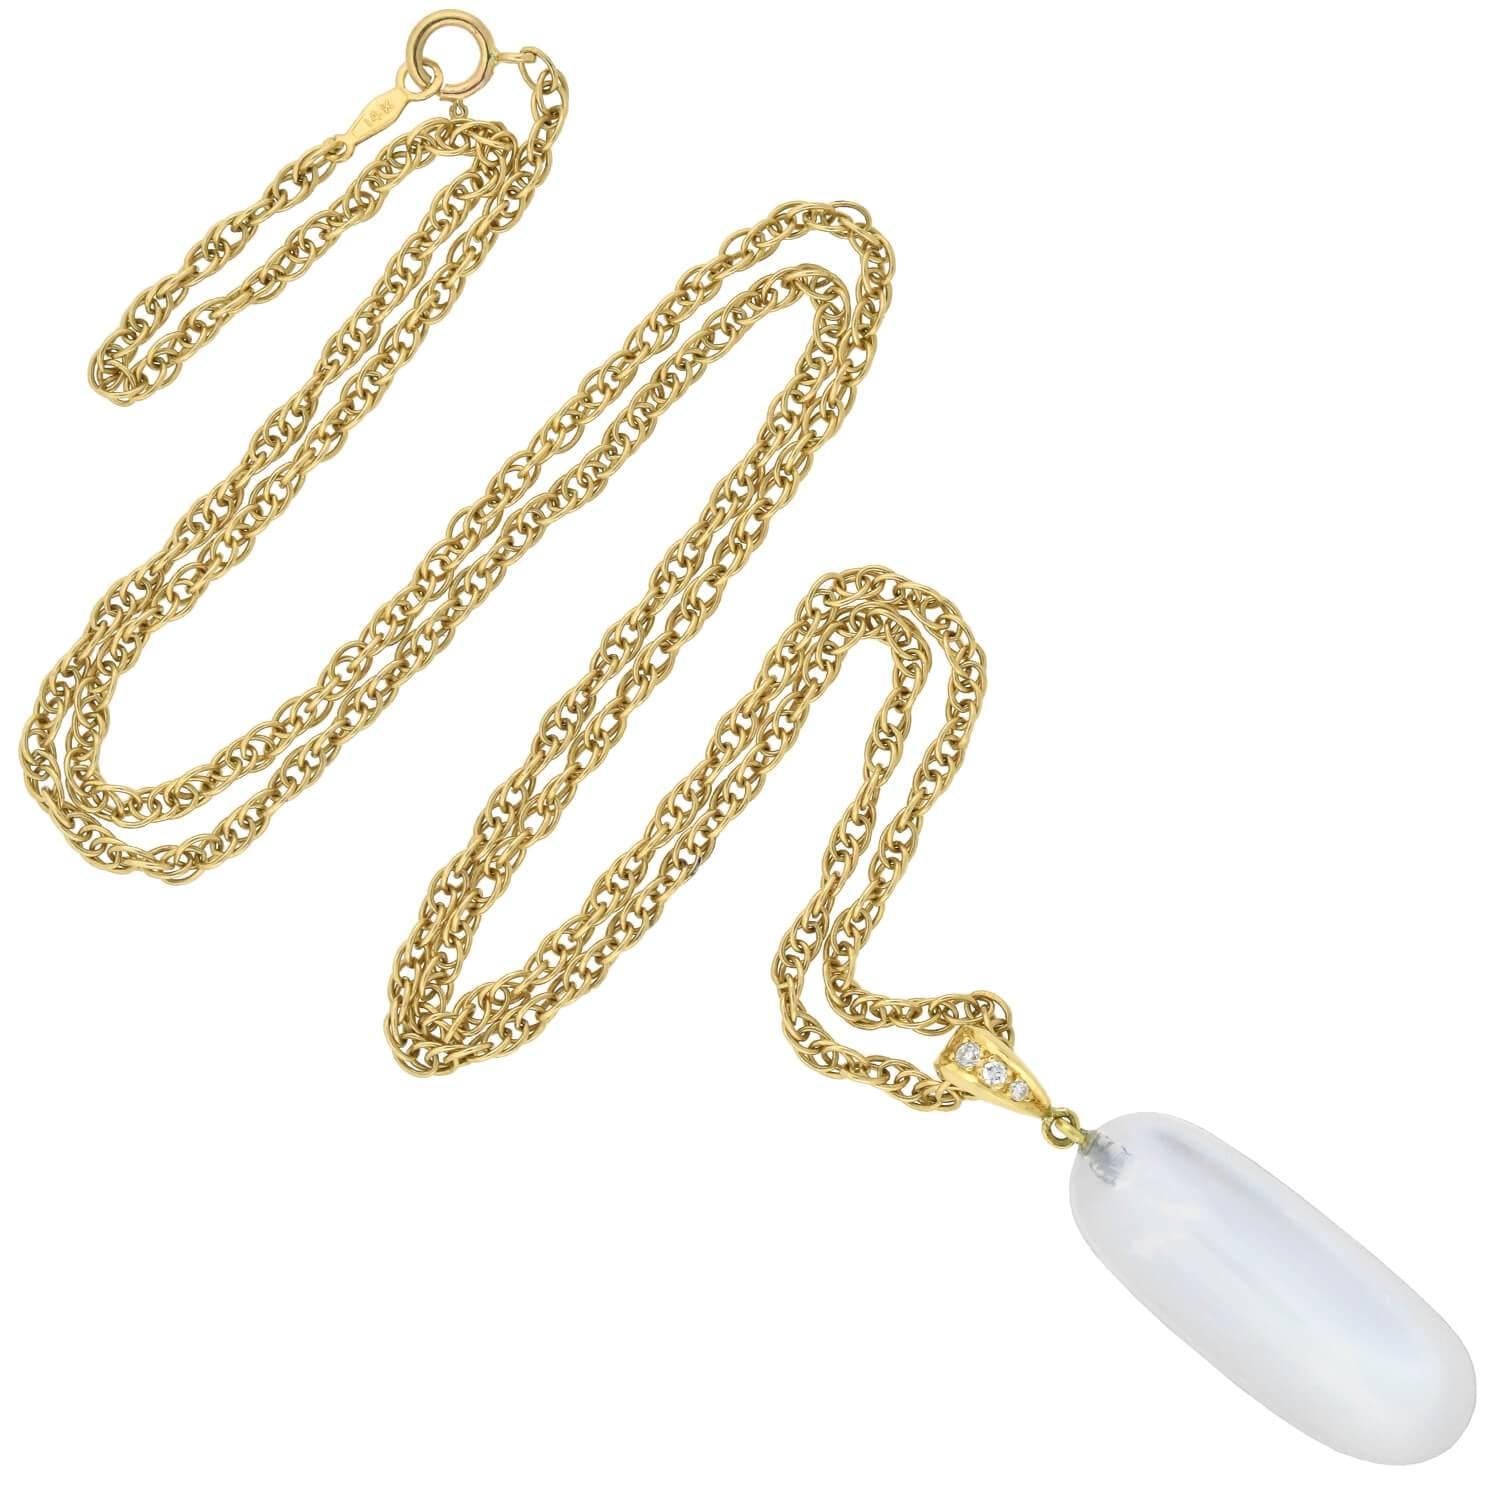 An alluring moonstone pendant compilation necklace from the Art Nouveau (ca1900s) era! This fabulous necklace is comprised of a glowing turn-of-the-century moonstone pendant that hangs from a modern 14kt yellow gold chain. The moonstone, which is